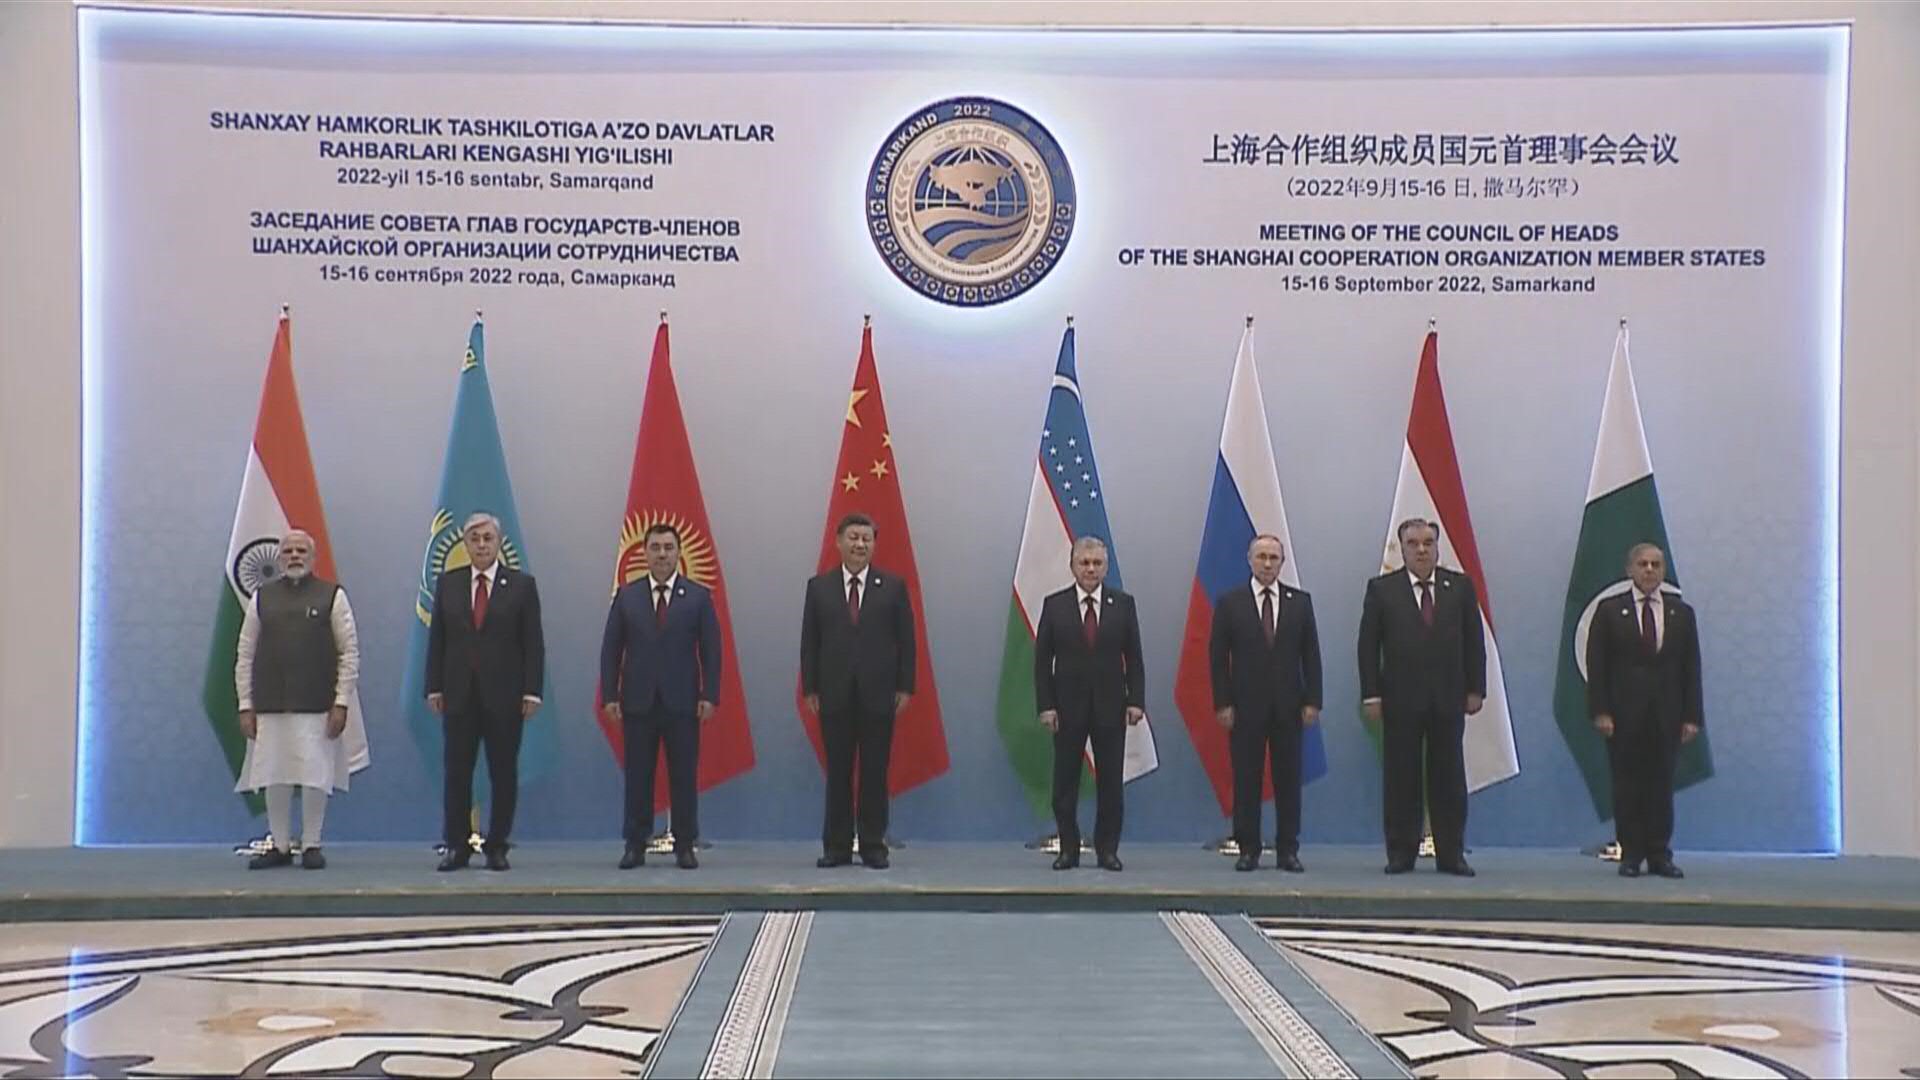 Presidents of China, Xi Jinping, and Russia, Vladimir Putin, positioned themselves as a counterbalance to Western influence at a regional summit in Uzbekistan that brings together several countries that have strained ties with the United States.